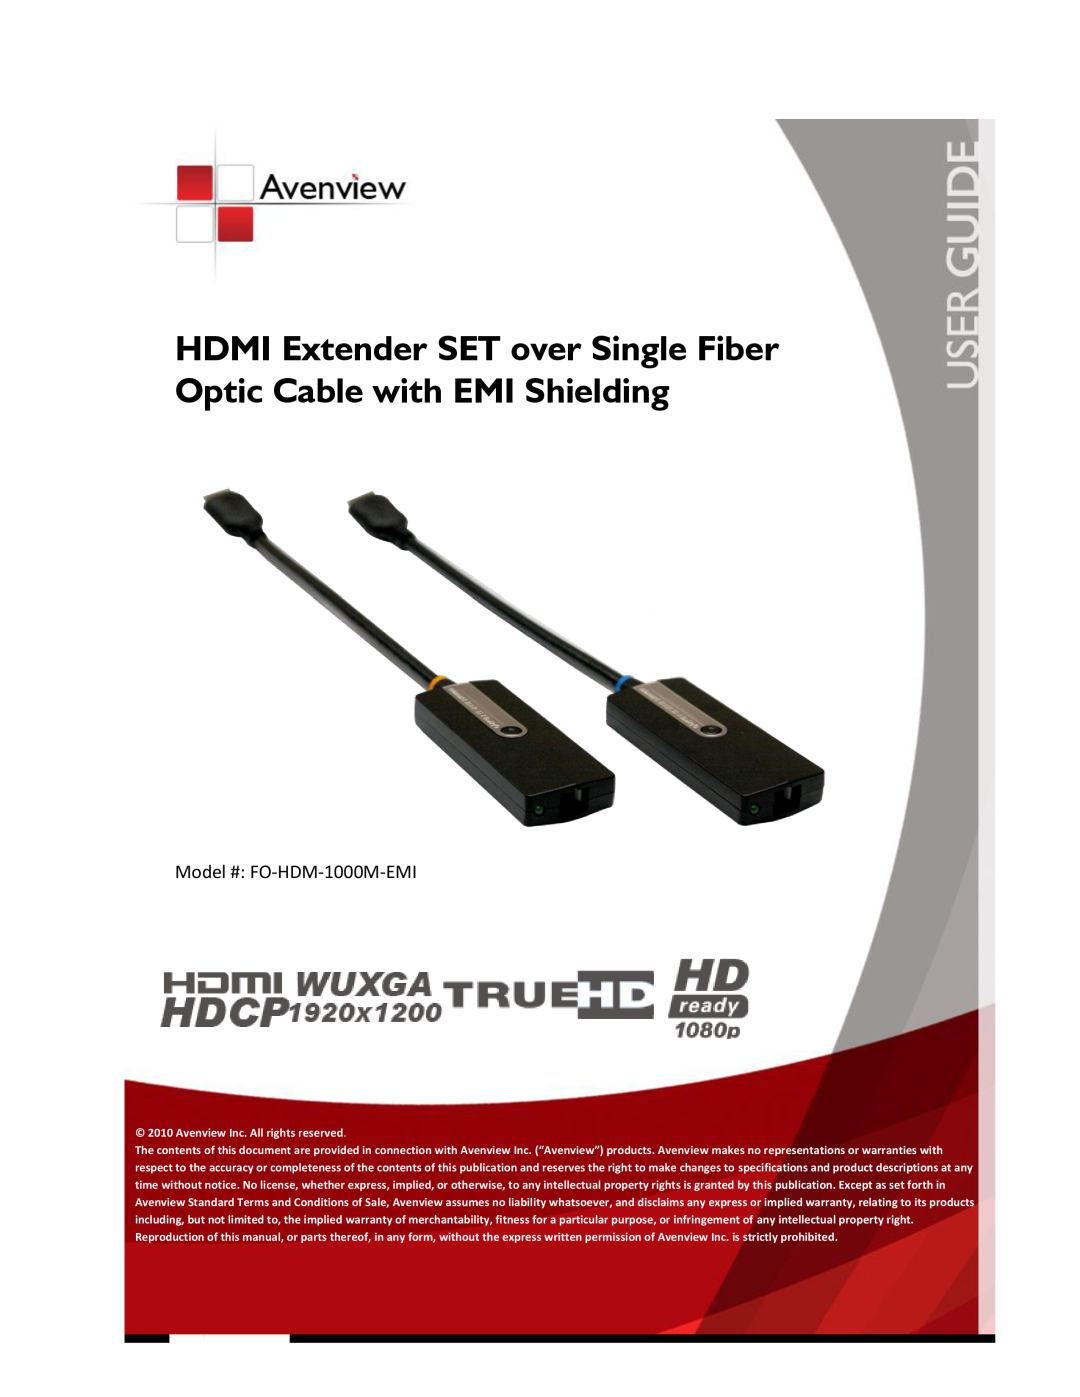 Avenview specifications Model # FO-HDM-1000M-EMI, HDMI Extender SET over Single Fiber Optic Cable with EMI Shielding 